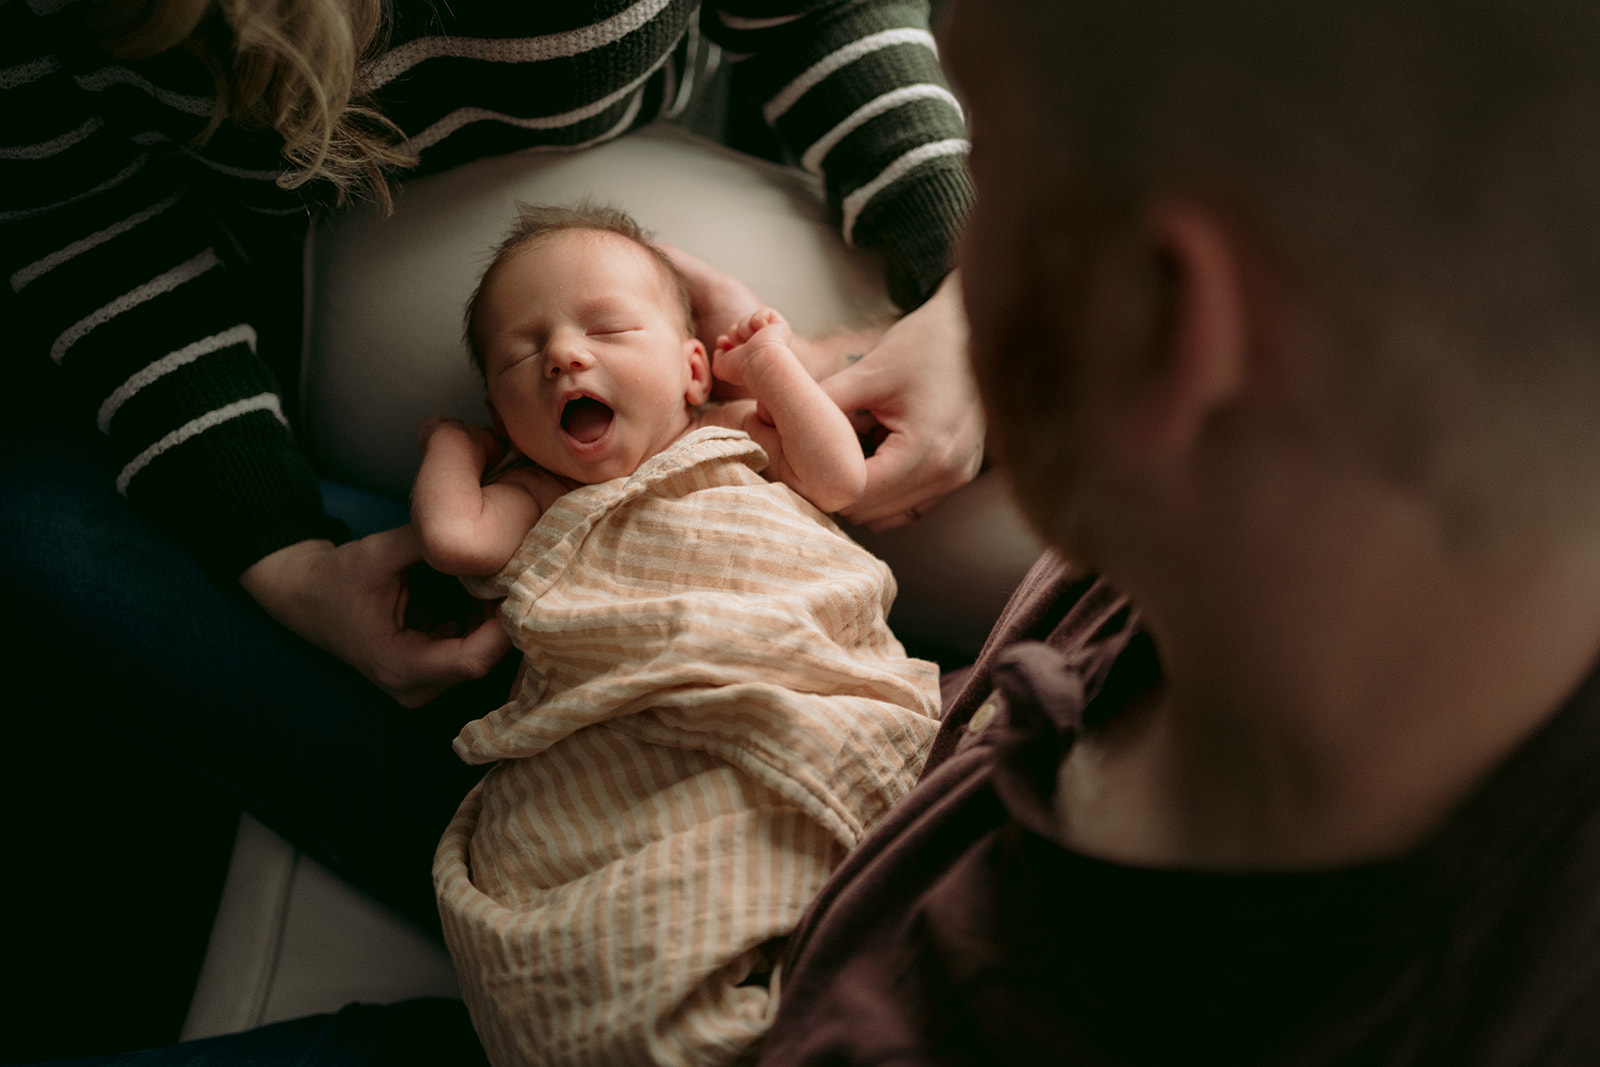 Newborn baby yawns in the window light being held by mother and father.